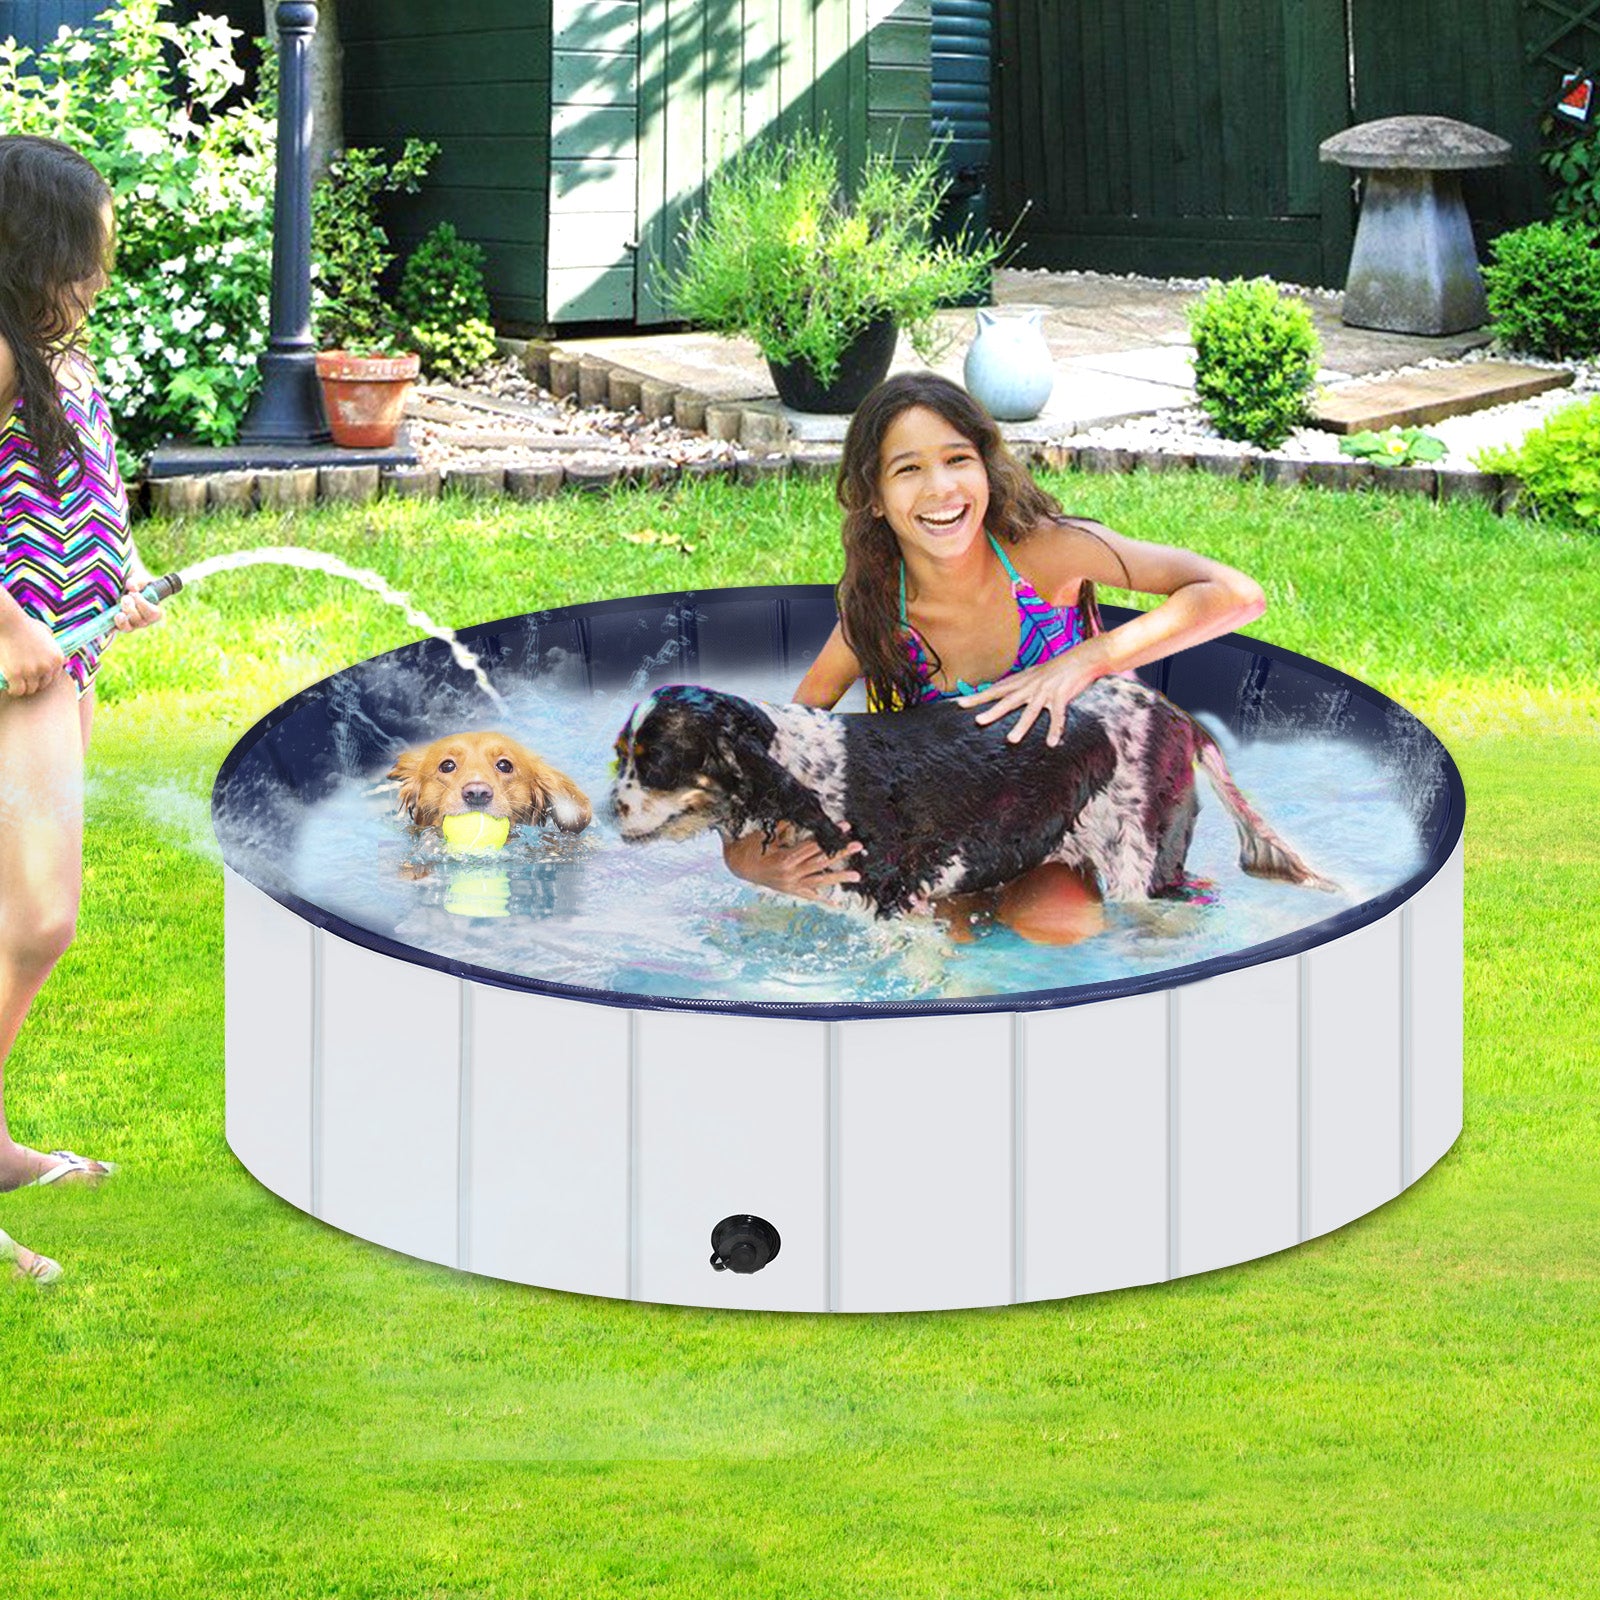 Foldable Dog Pool, Portable Hard Plastic Pet Pool For Dogs And Cats, Sturdy And Durable Pet Wading Pool For Indoor And Outdoor